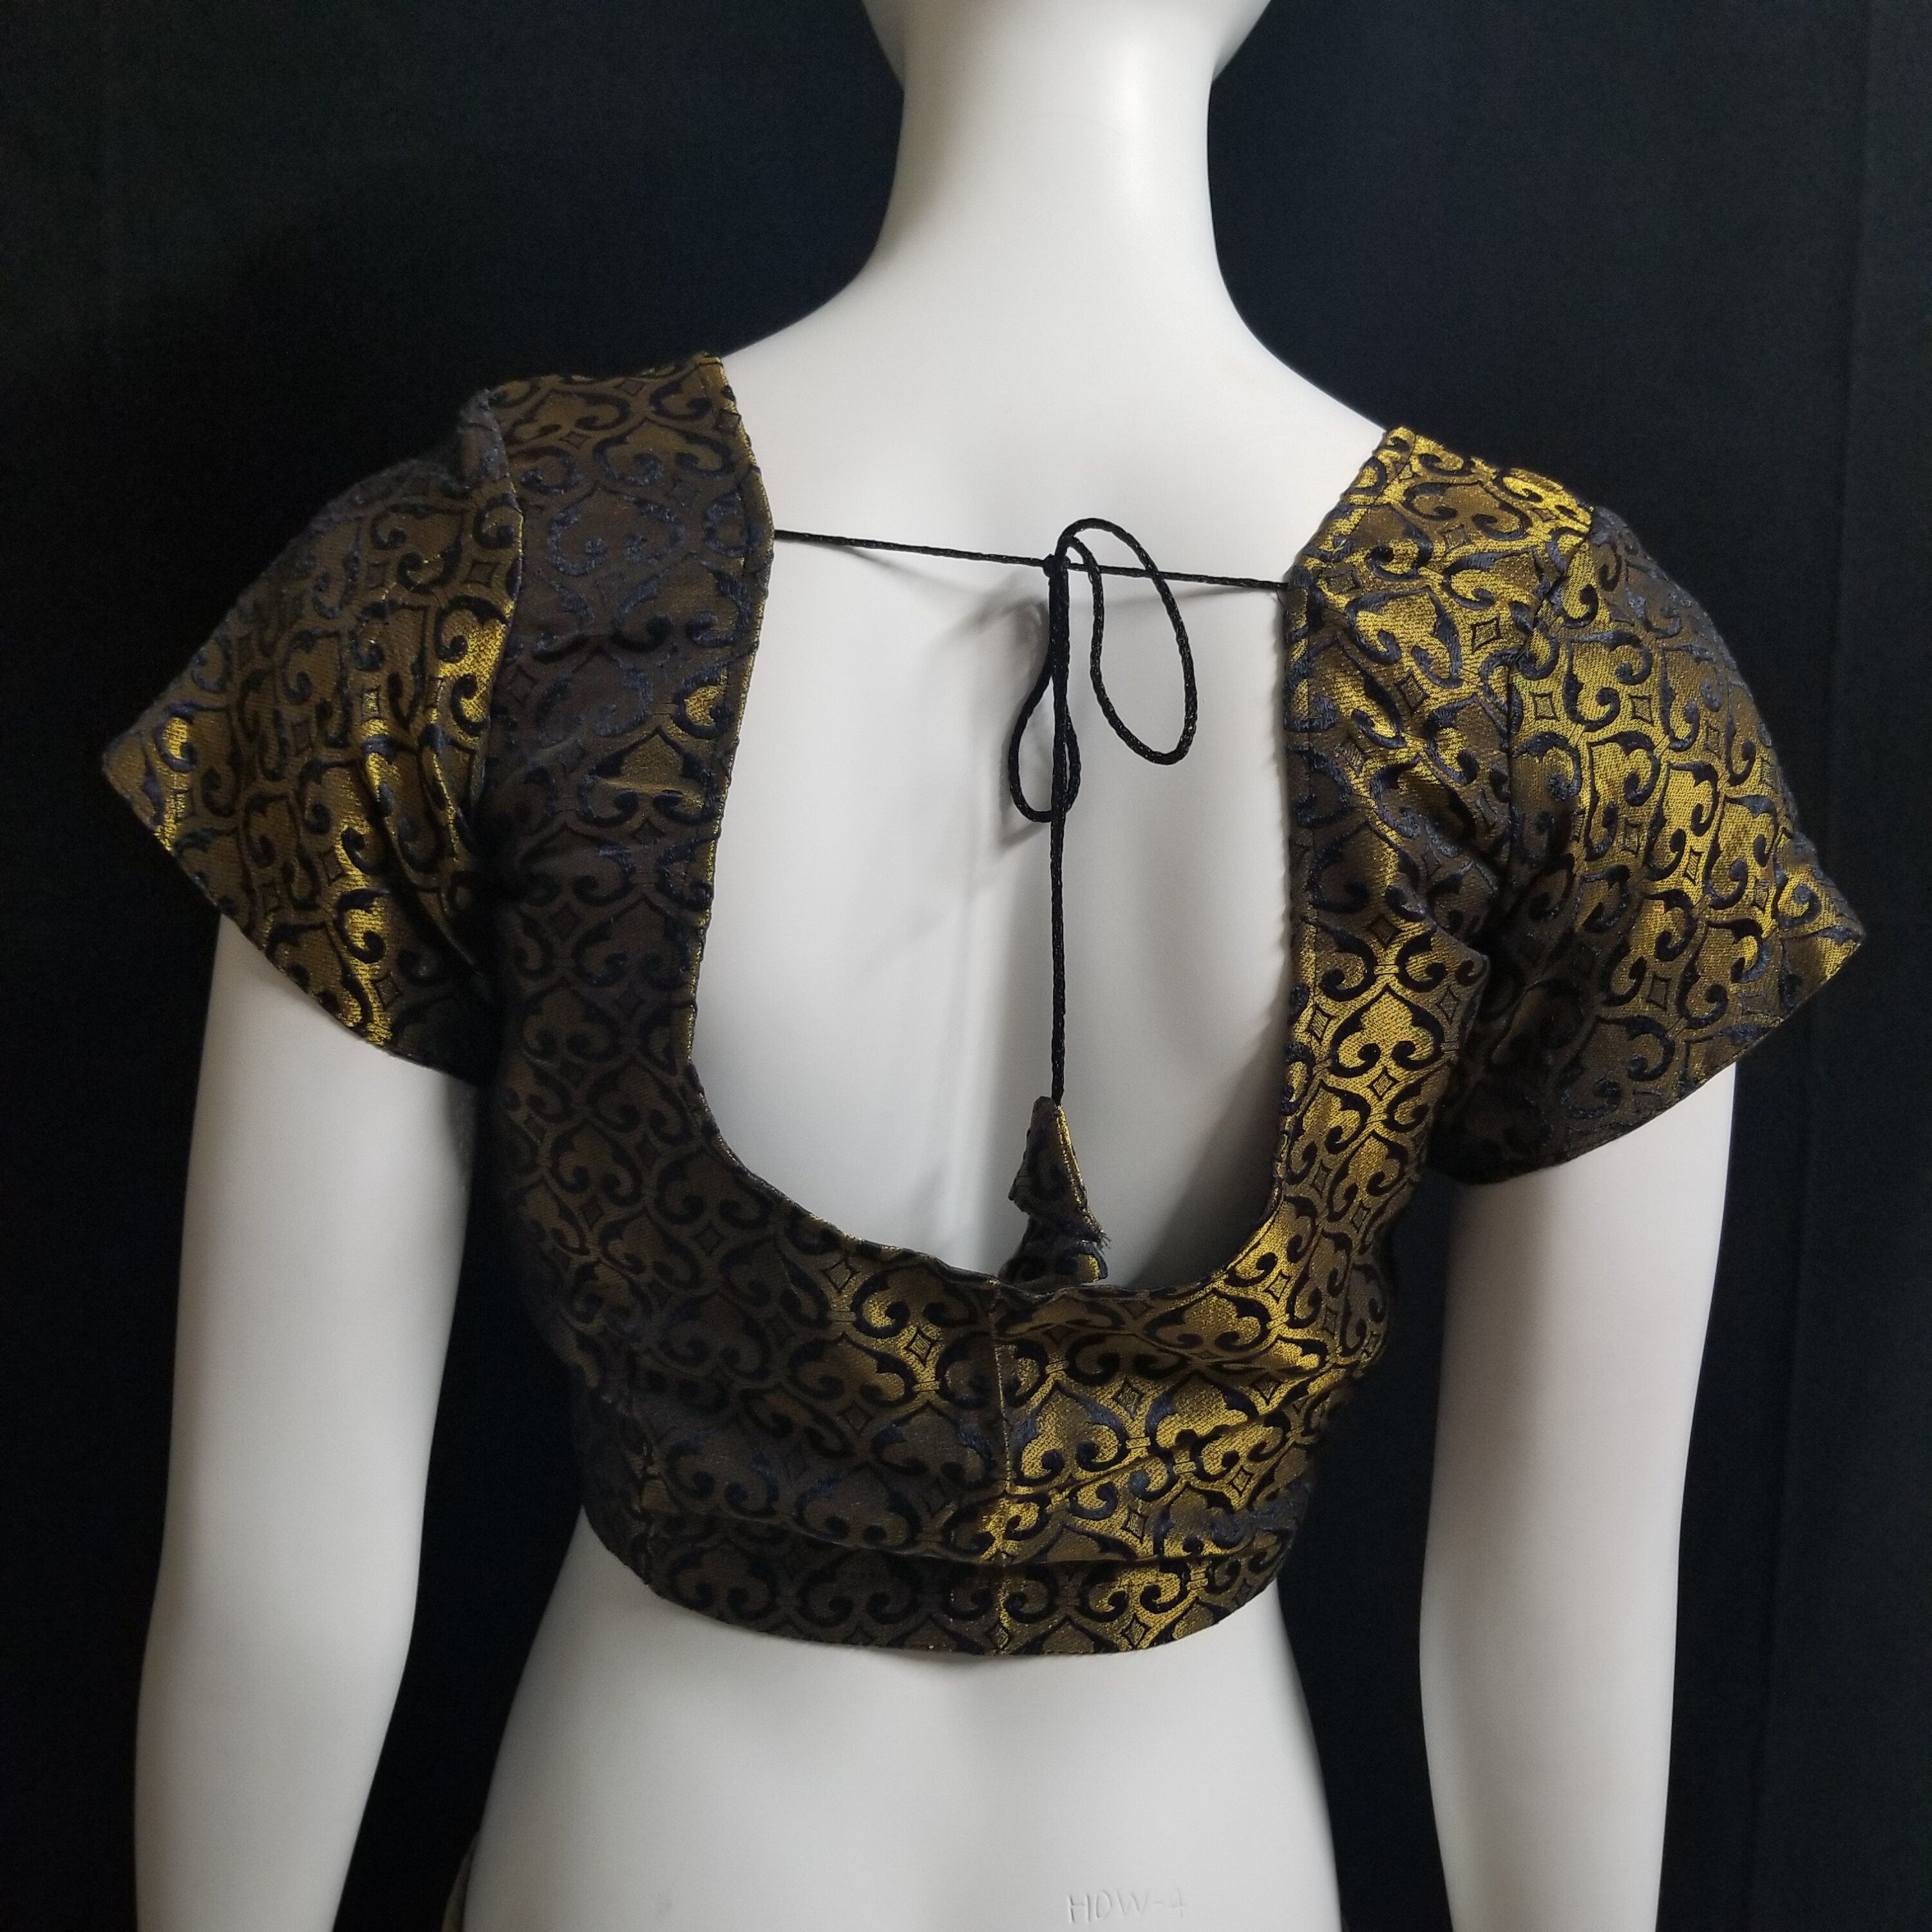 Readymade Saree Blouse - Black with gold Blouse for Saree - Princess cut with padded  - size 38" alter to 36"/40"